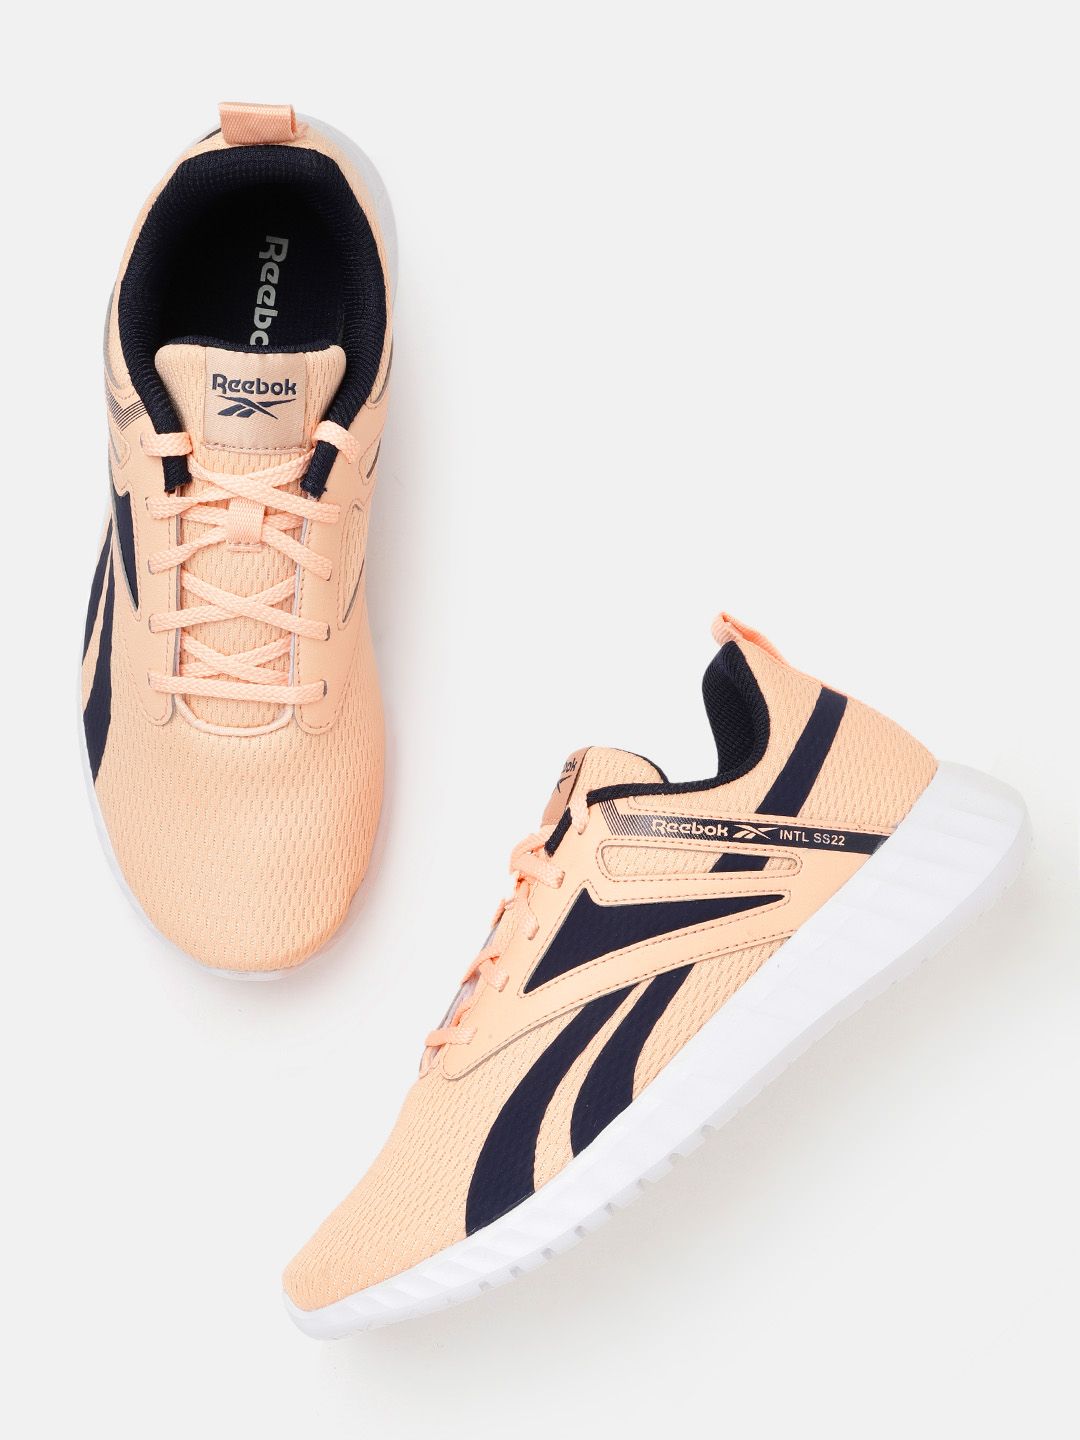 Reebok Women Peach-Coloured Woven Design Conor Running Shoes Price in India